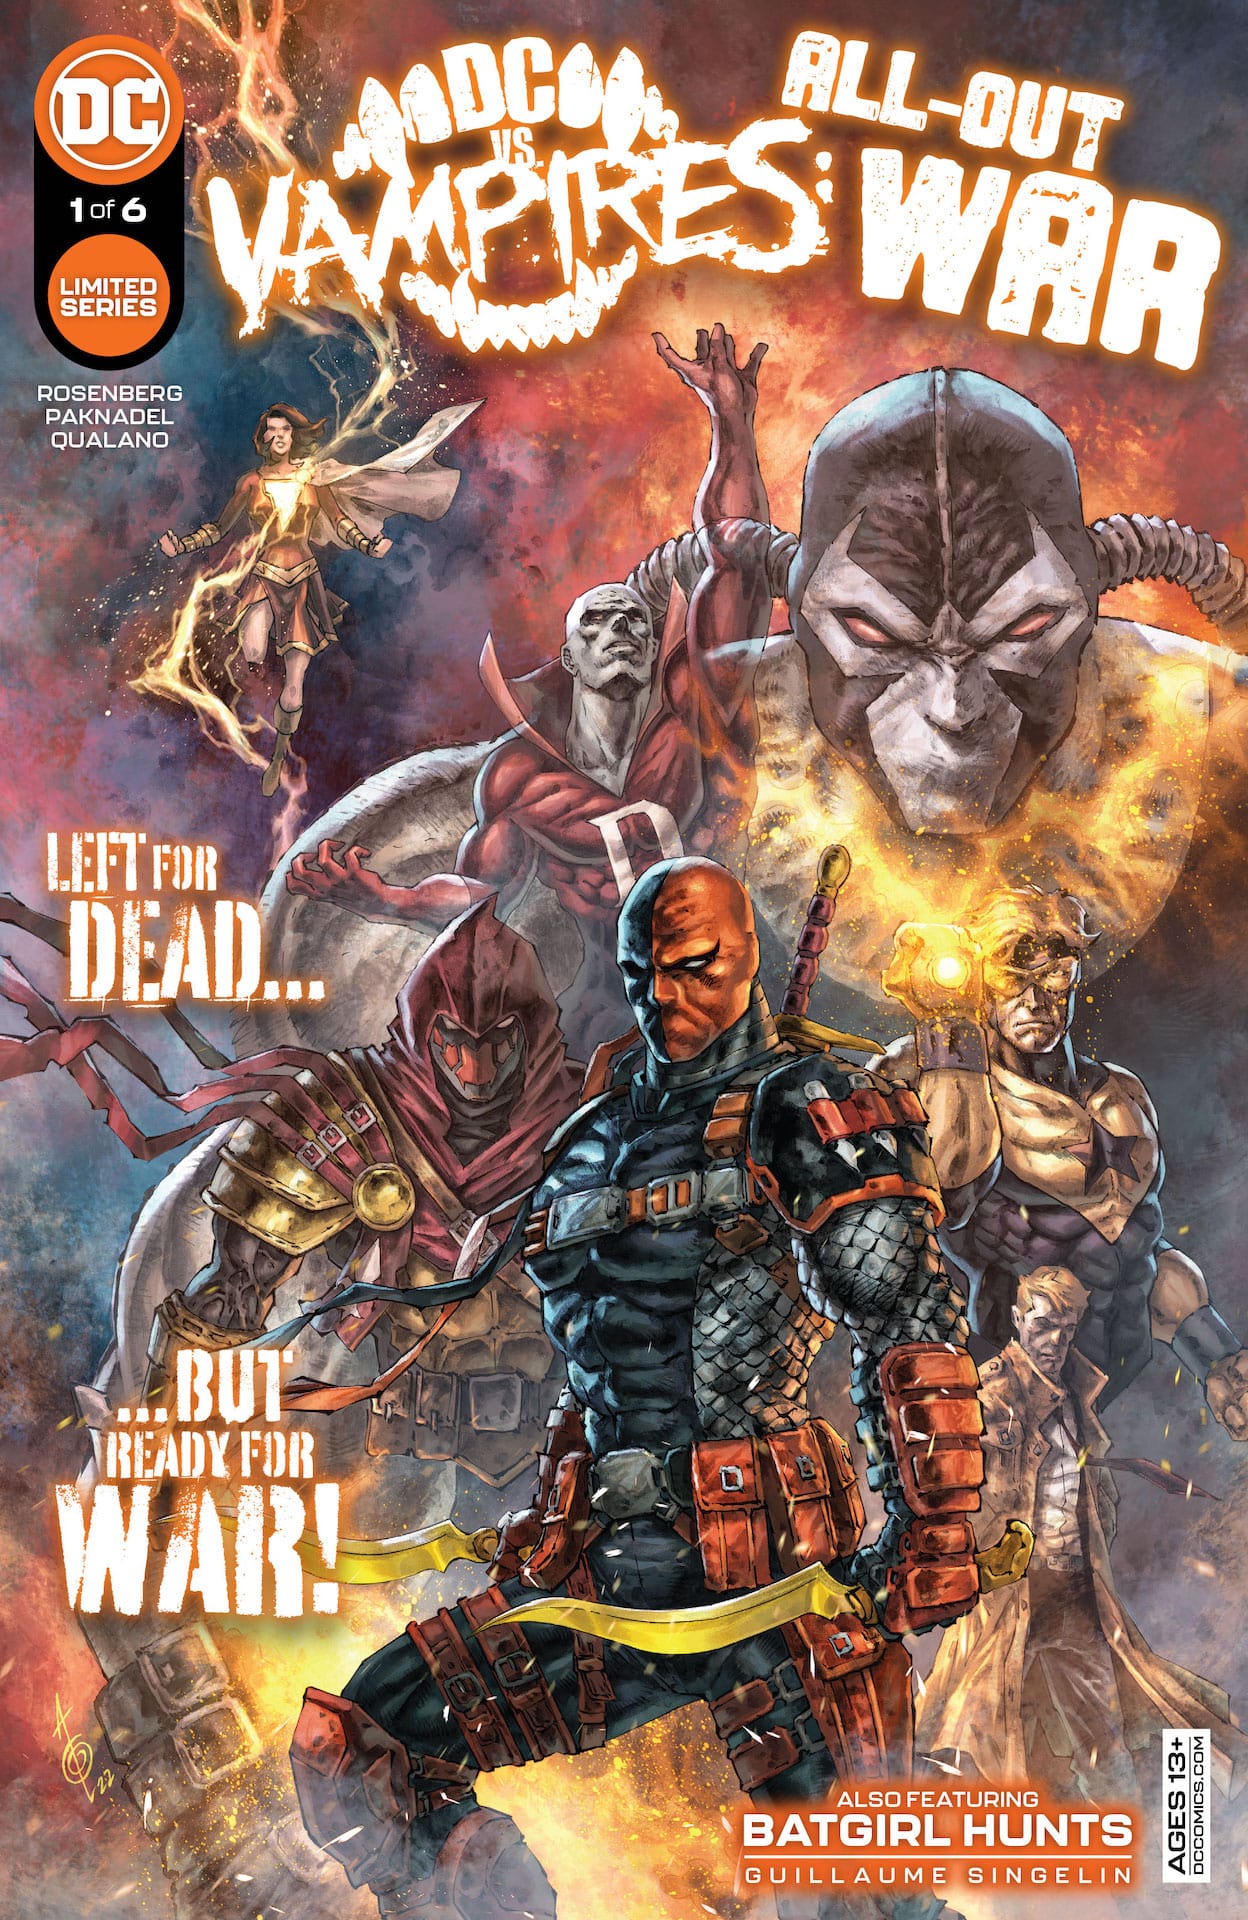 DC Preview: DC vs. Vampires: All-Out War #1